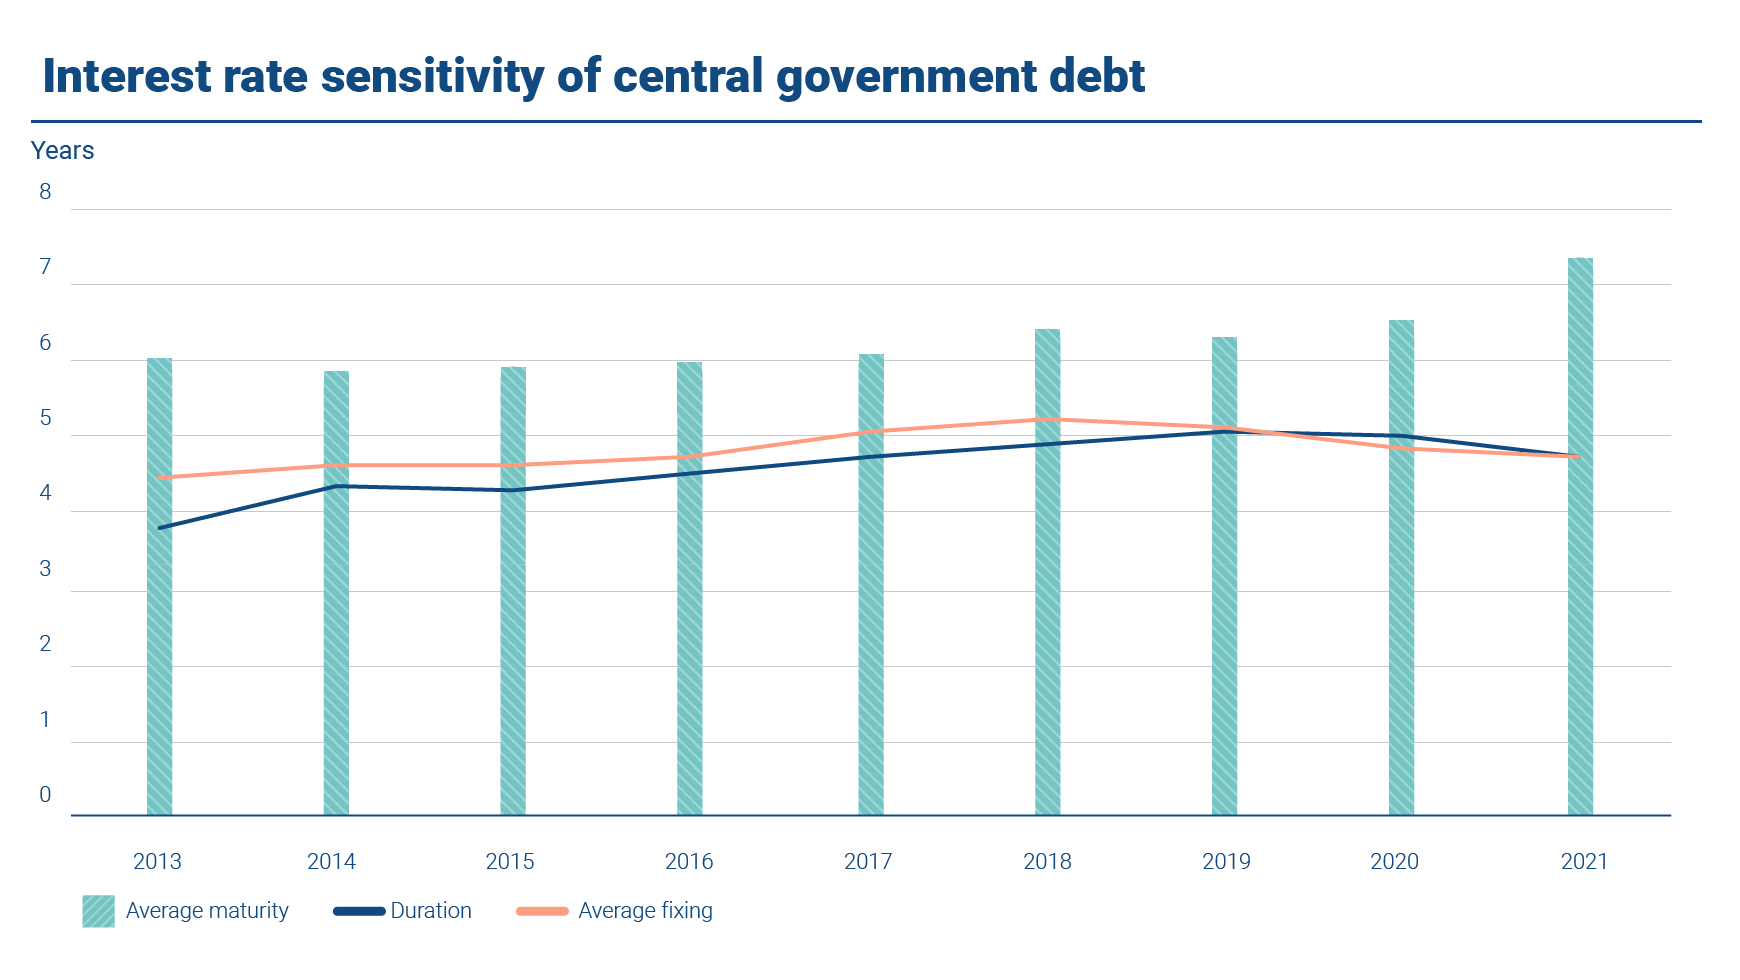 The statistics present key figures on the interest rate sensitivity of central government debt. At the end of 2021, the average fixing of the central government debt was 4.74 years and duration 4.76 years. The average maturity was 7.4 years.